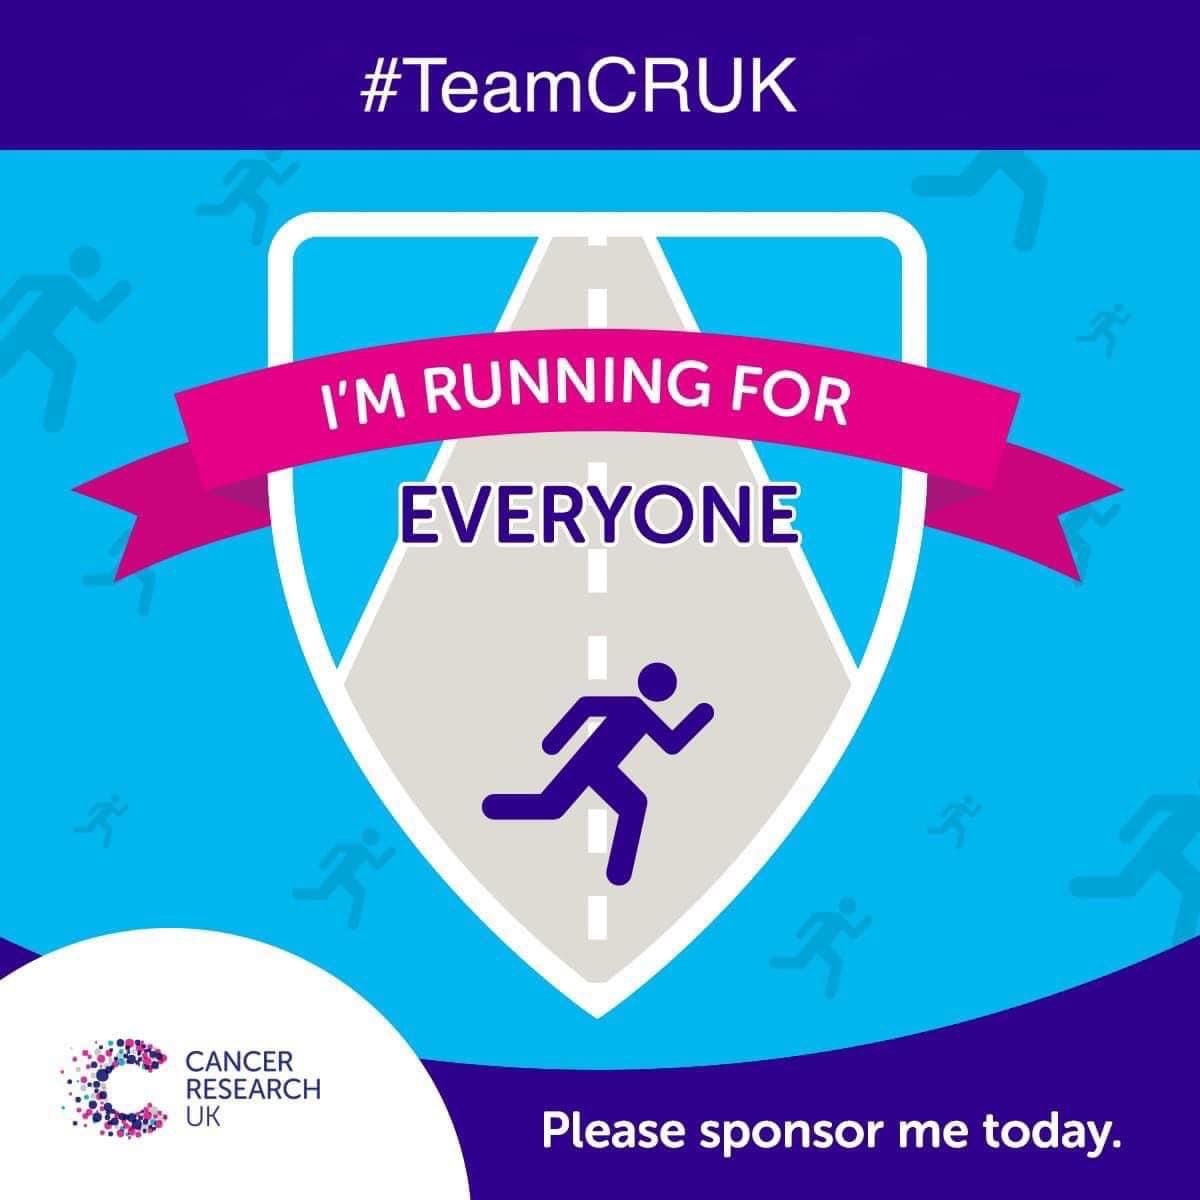 Heading to the start of today’s #Brooklyn Half Marathon for @CR_UK Thanks for all the support. Together we’re bringing about a world where people will live longer, better lives free from the fear of cancer. We’re beating cancer step by step day by day justgiving.com/page/patrickan…